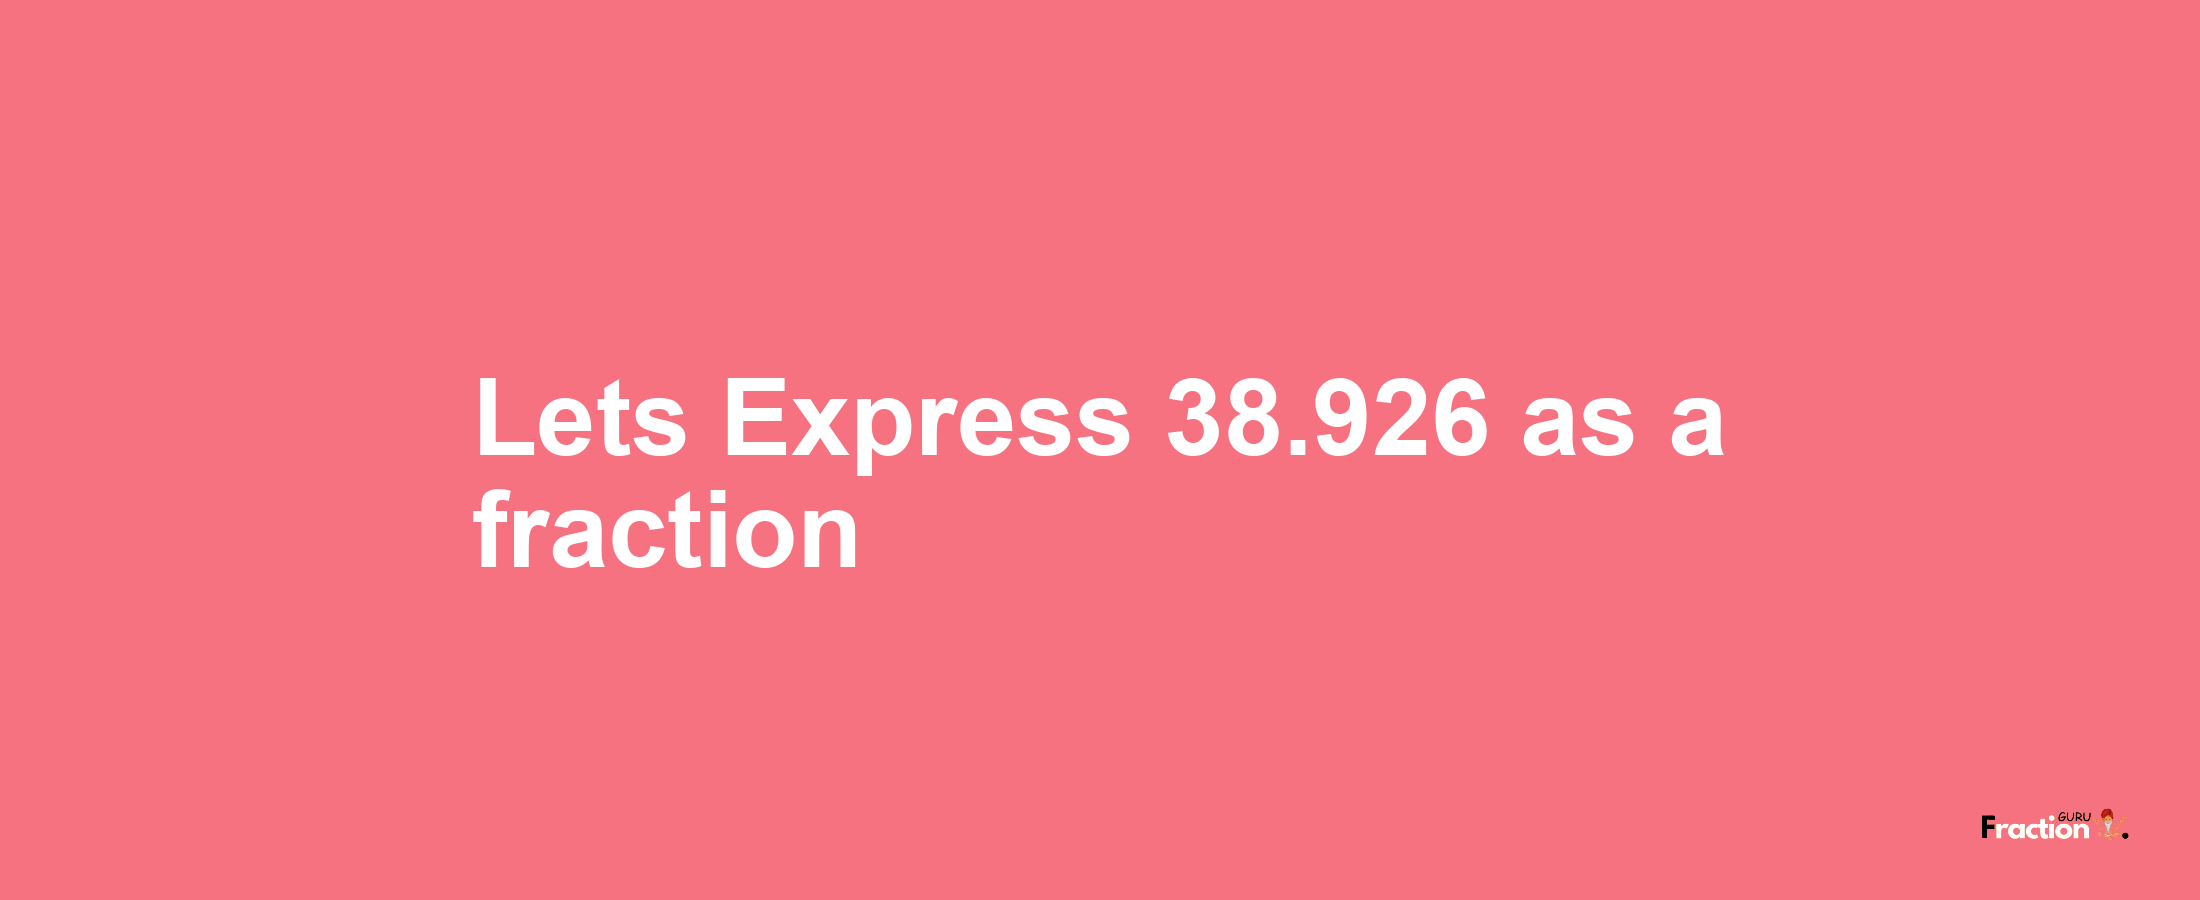 Lets Express 38.926 as afraction